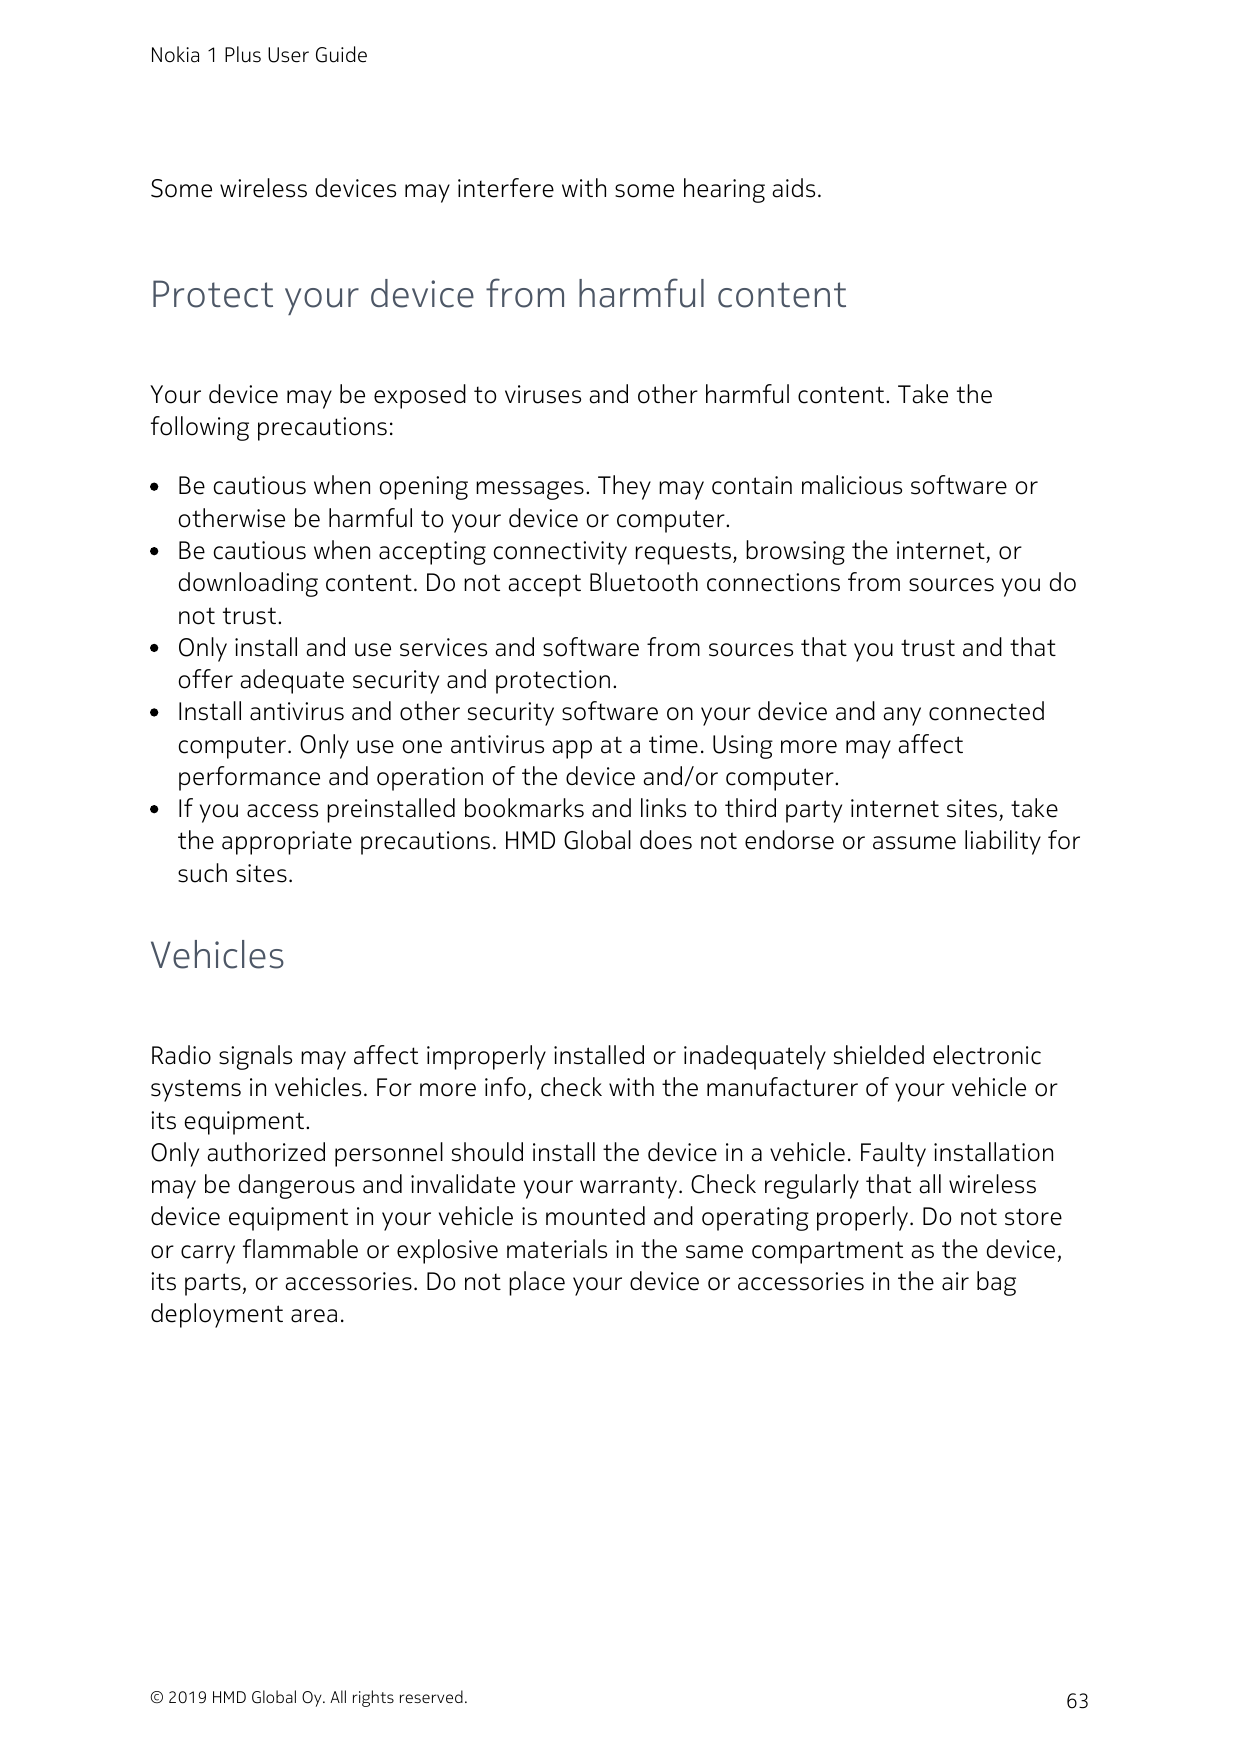 Nokia 1 Plus User GuideSome wireless devices may interfere with some hearing aids.Protect your device from harmful contentYour d